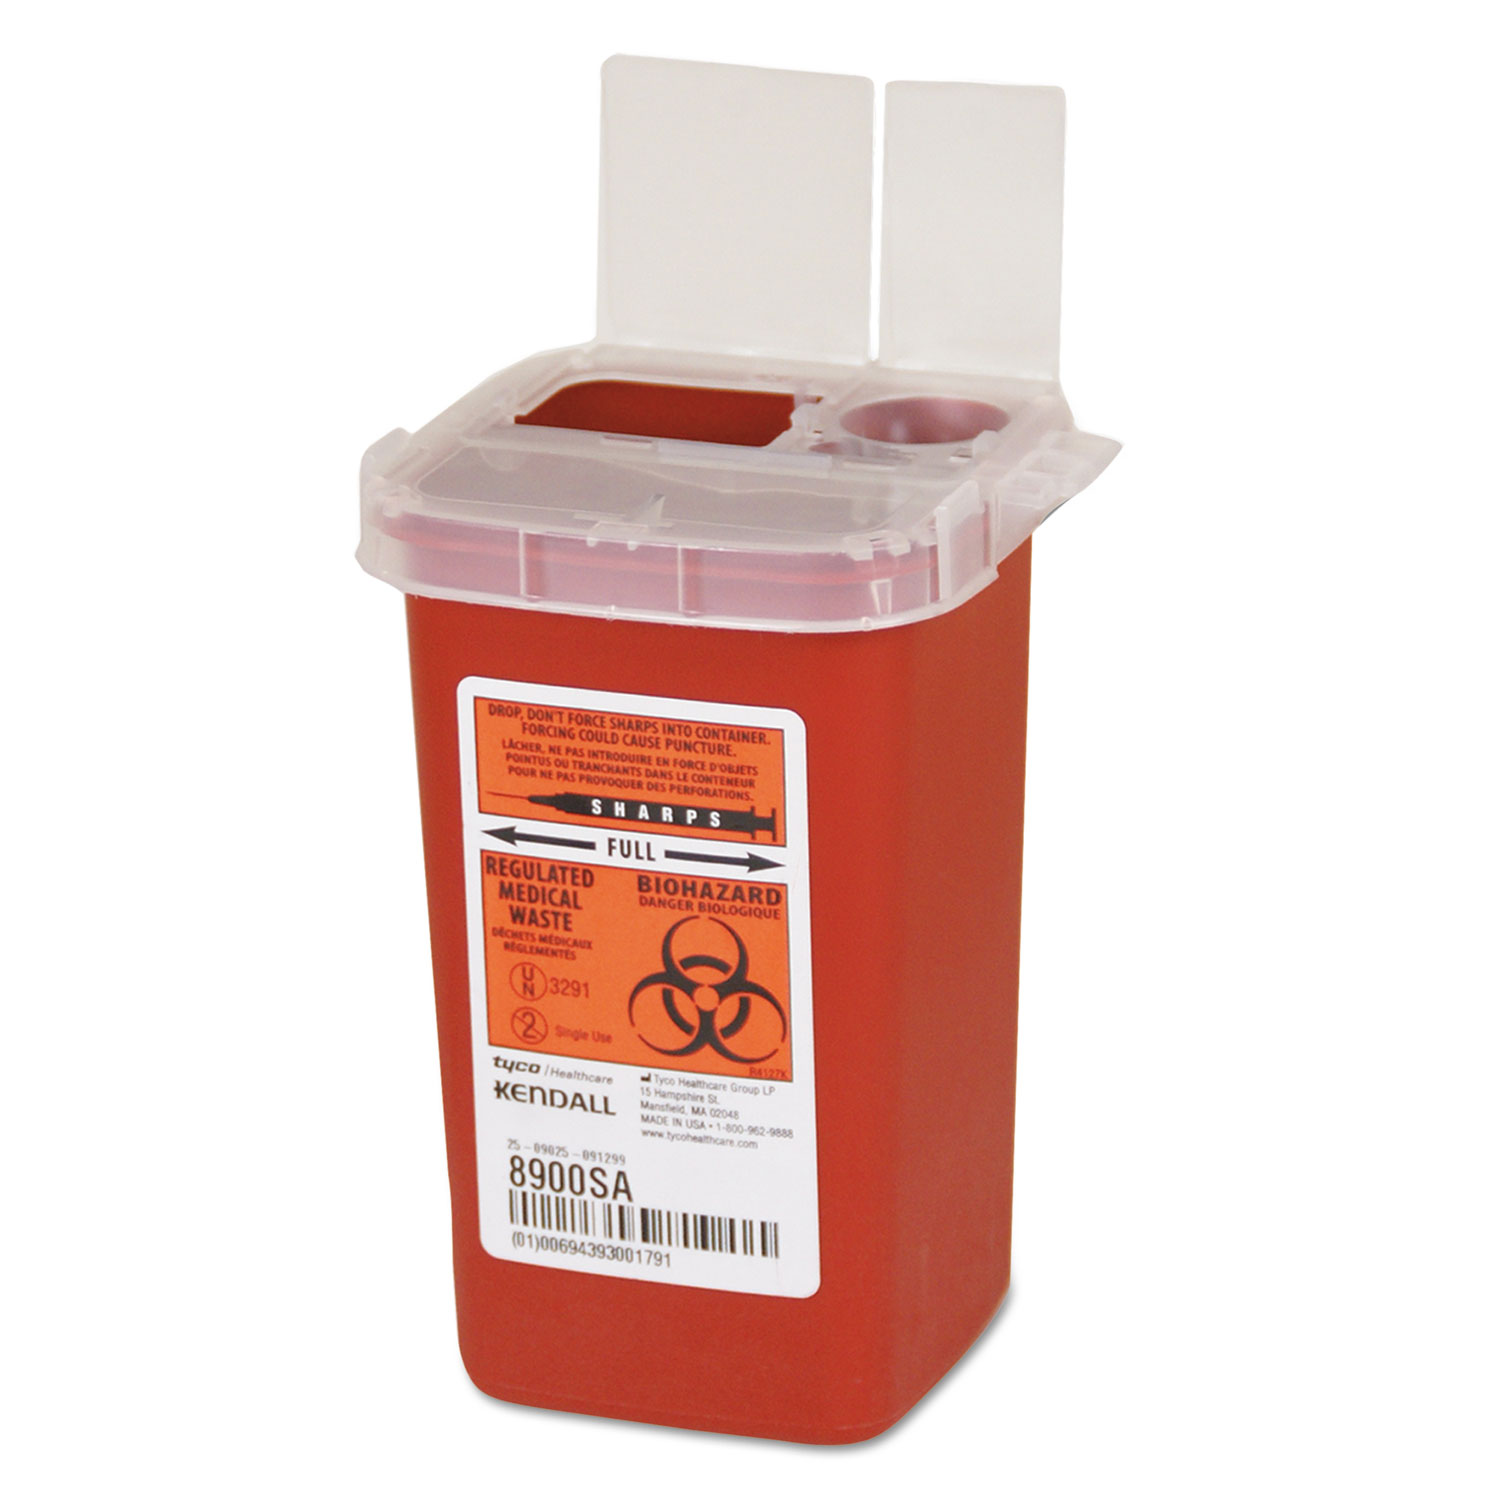 Sharps Containers, Polypropylene, 1/4 gal, 3 1/2 x 4 1/4 x 5 1/2, Red